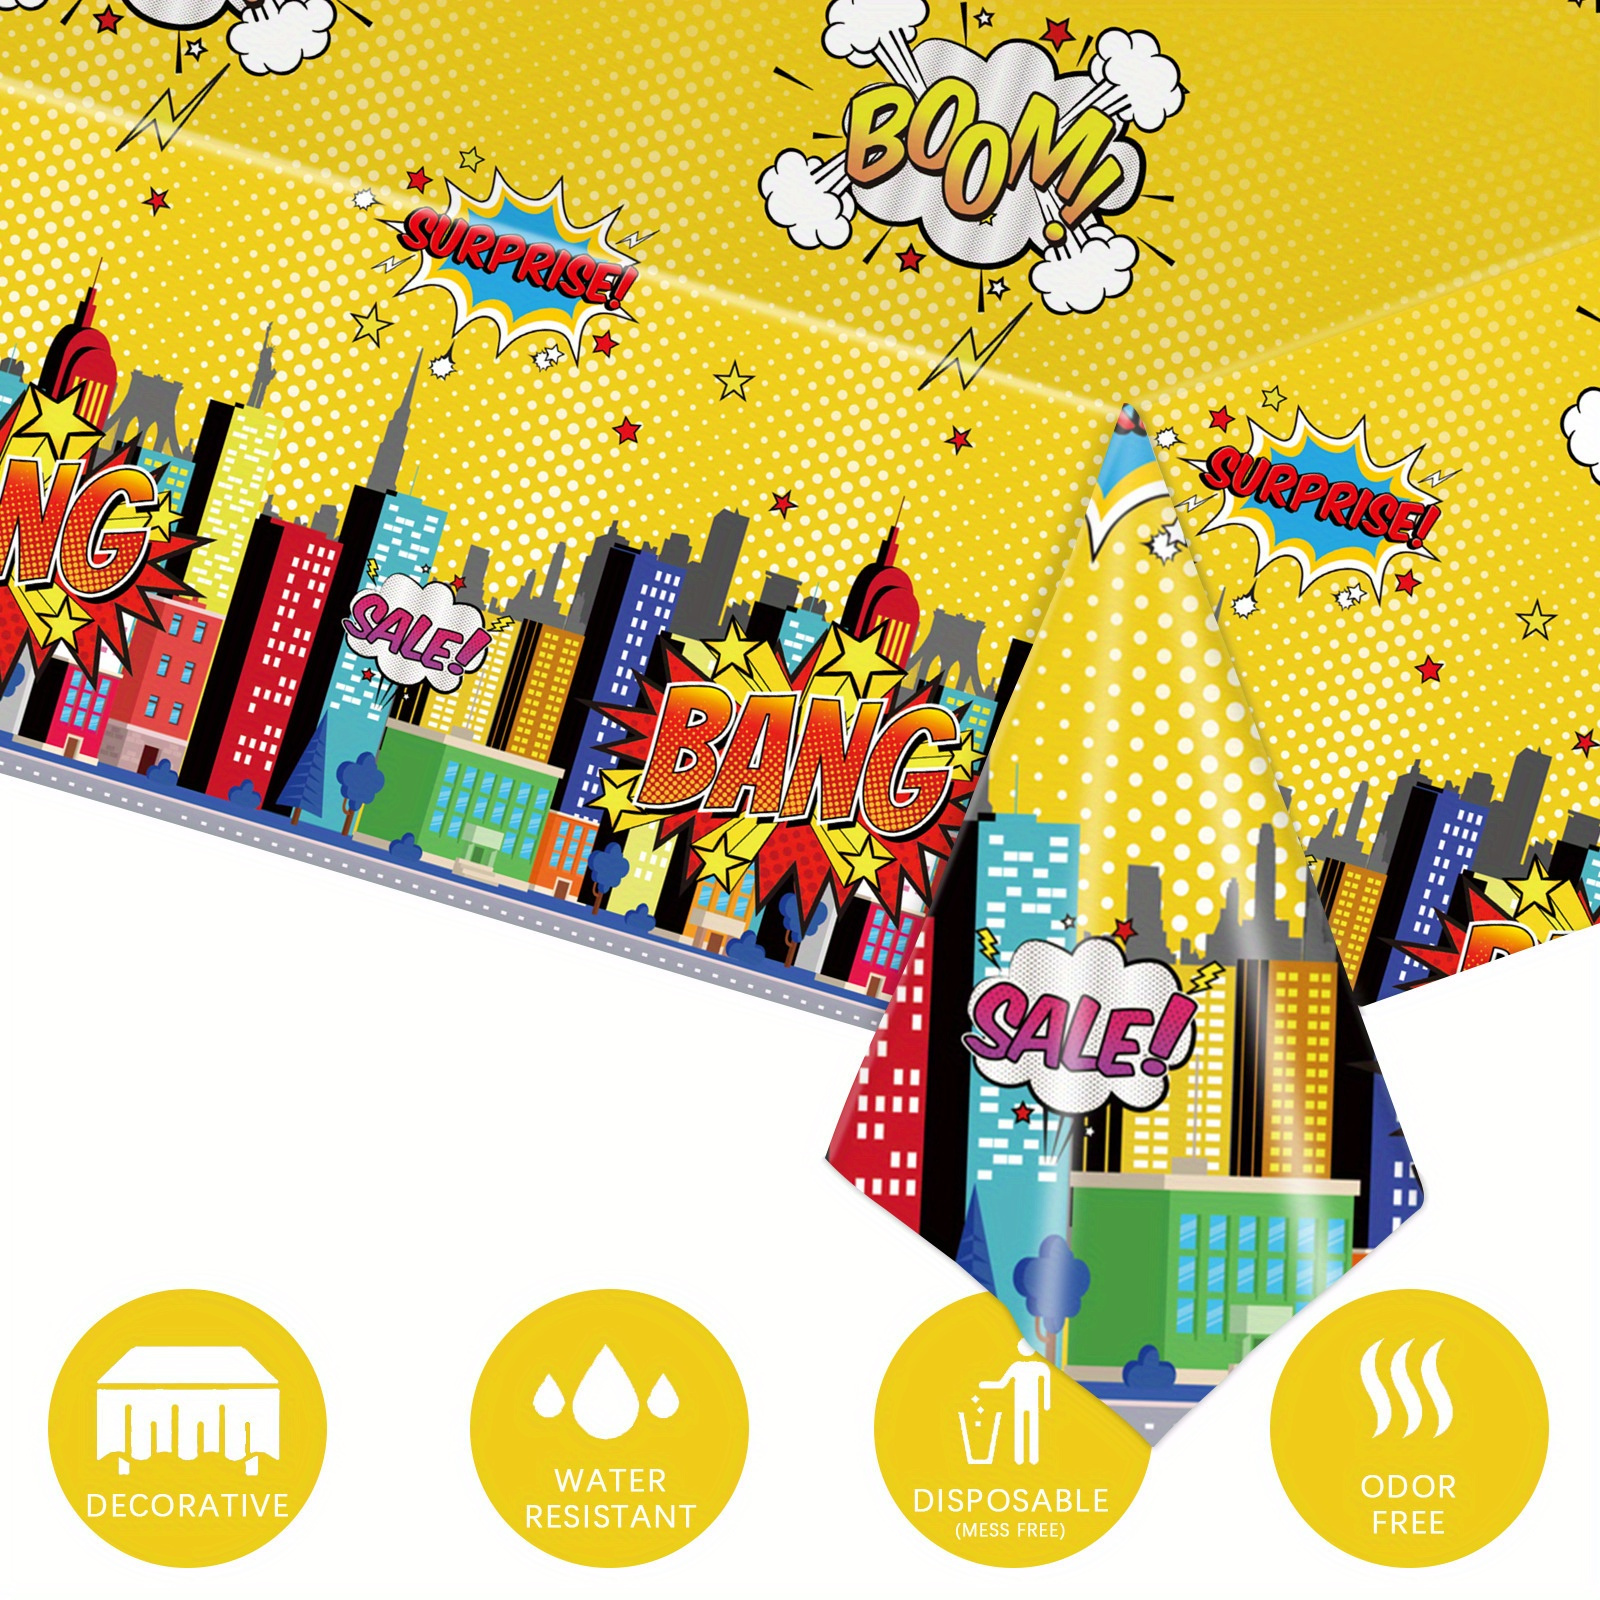 

1pc, Disposable Hero Themed Party Tablecloth, Water-resistant Plastic, Yellow Comic City Design, Decorative Odor-free Table Cover For Events